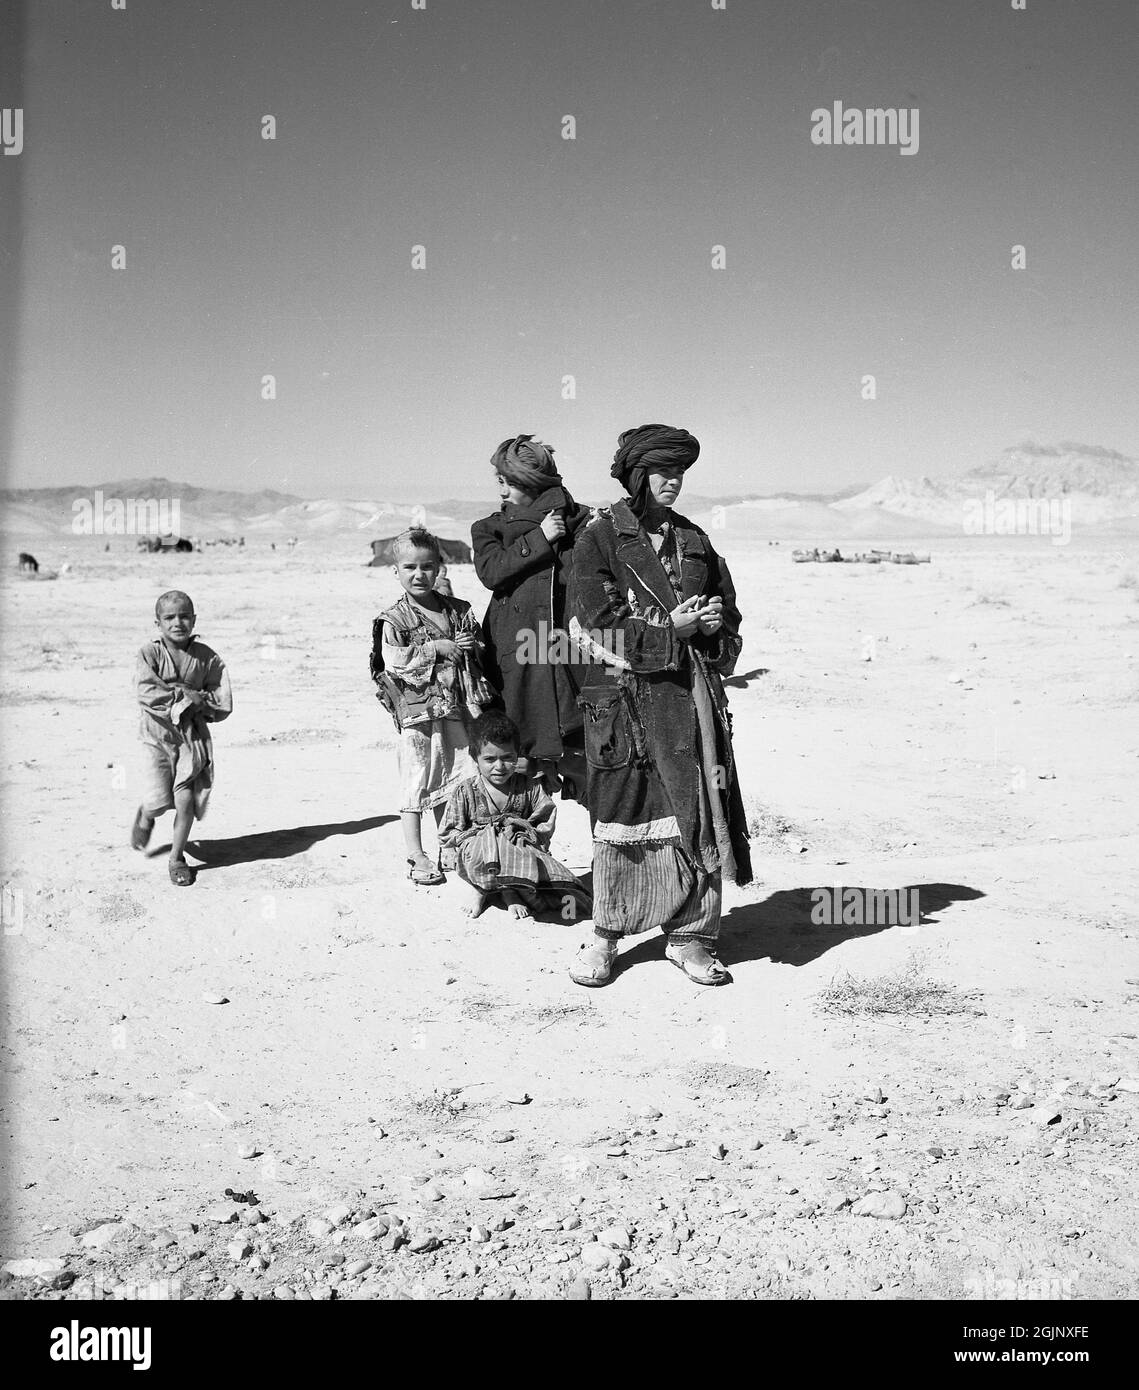 1950s, historical, two nomadic Afghan young males wearing turbans and ragged clothes standing with small children out in the arid, barren desert of Afghanistan. Stock Photo